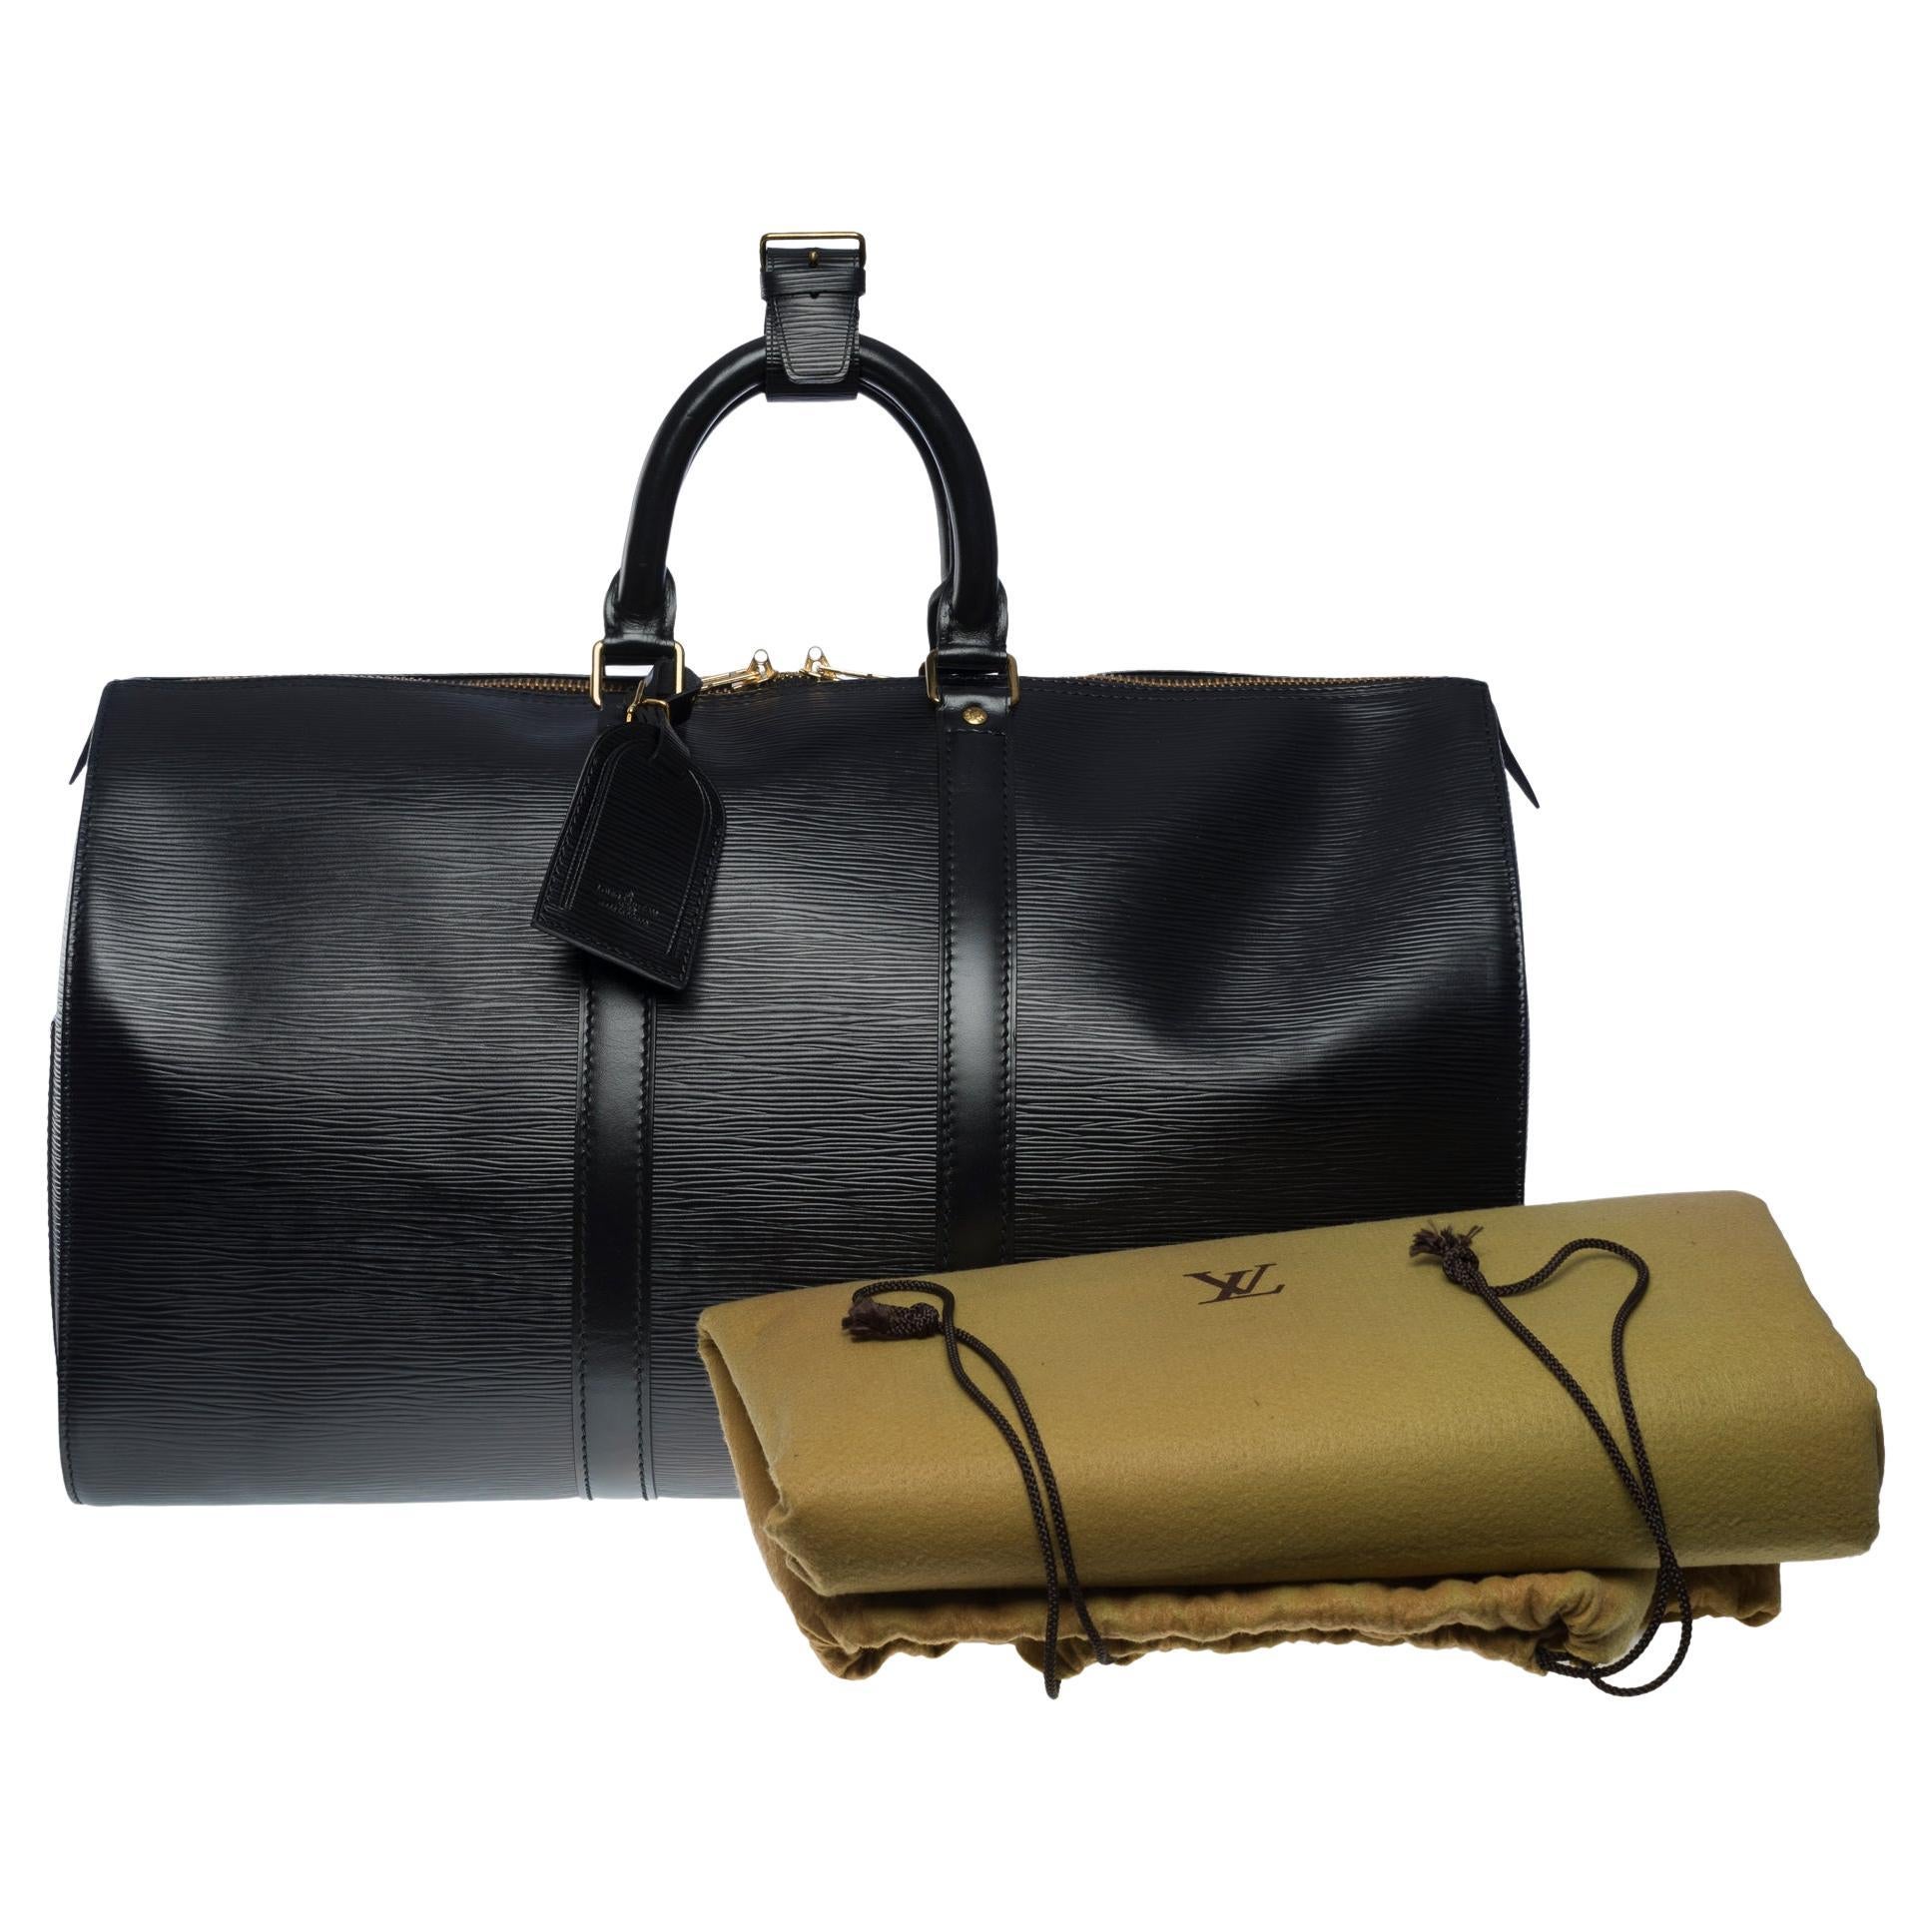 The very Chic Louis Vuitton Keepall 45 Travel bag in black epi